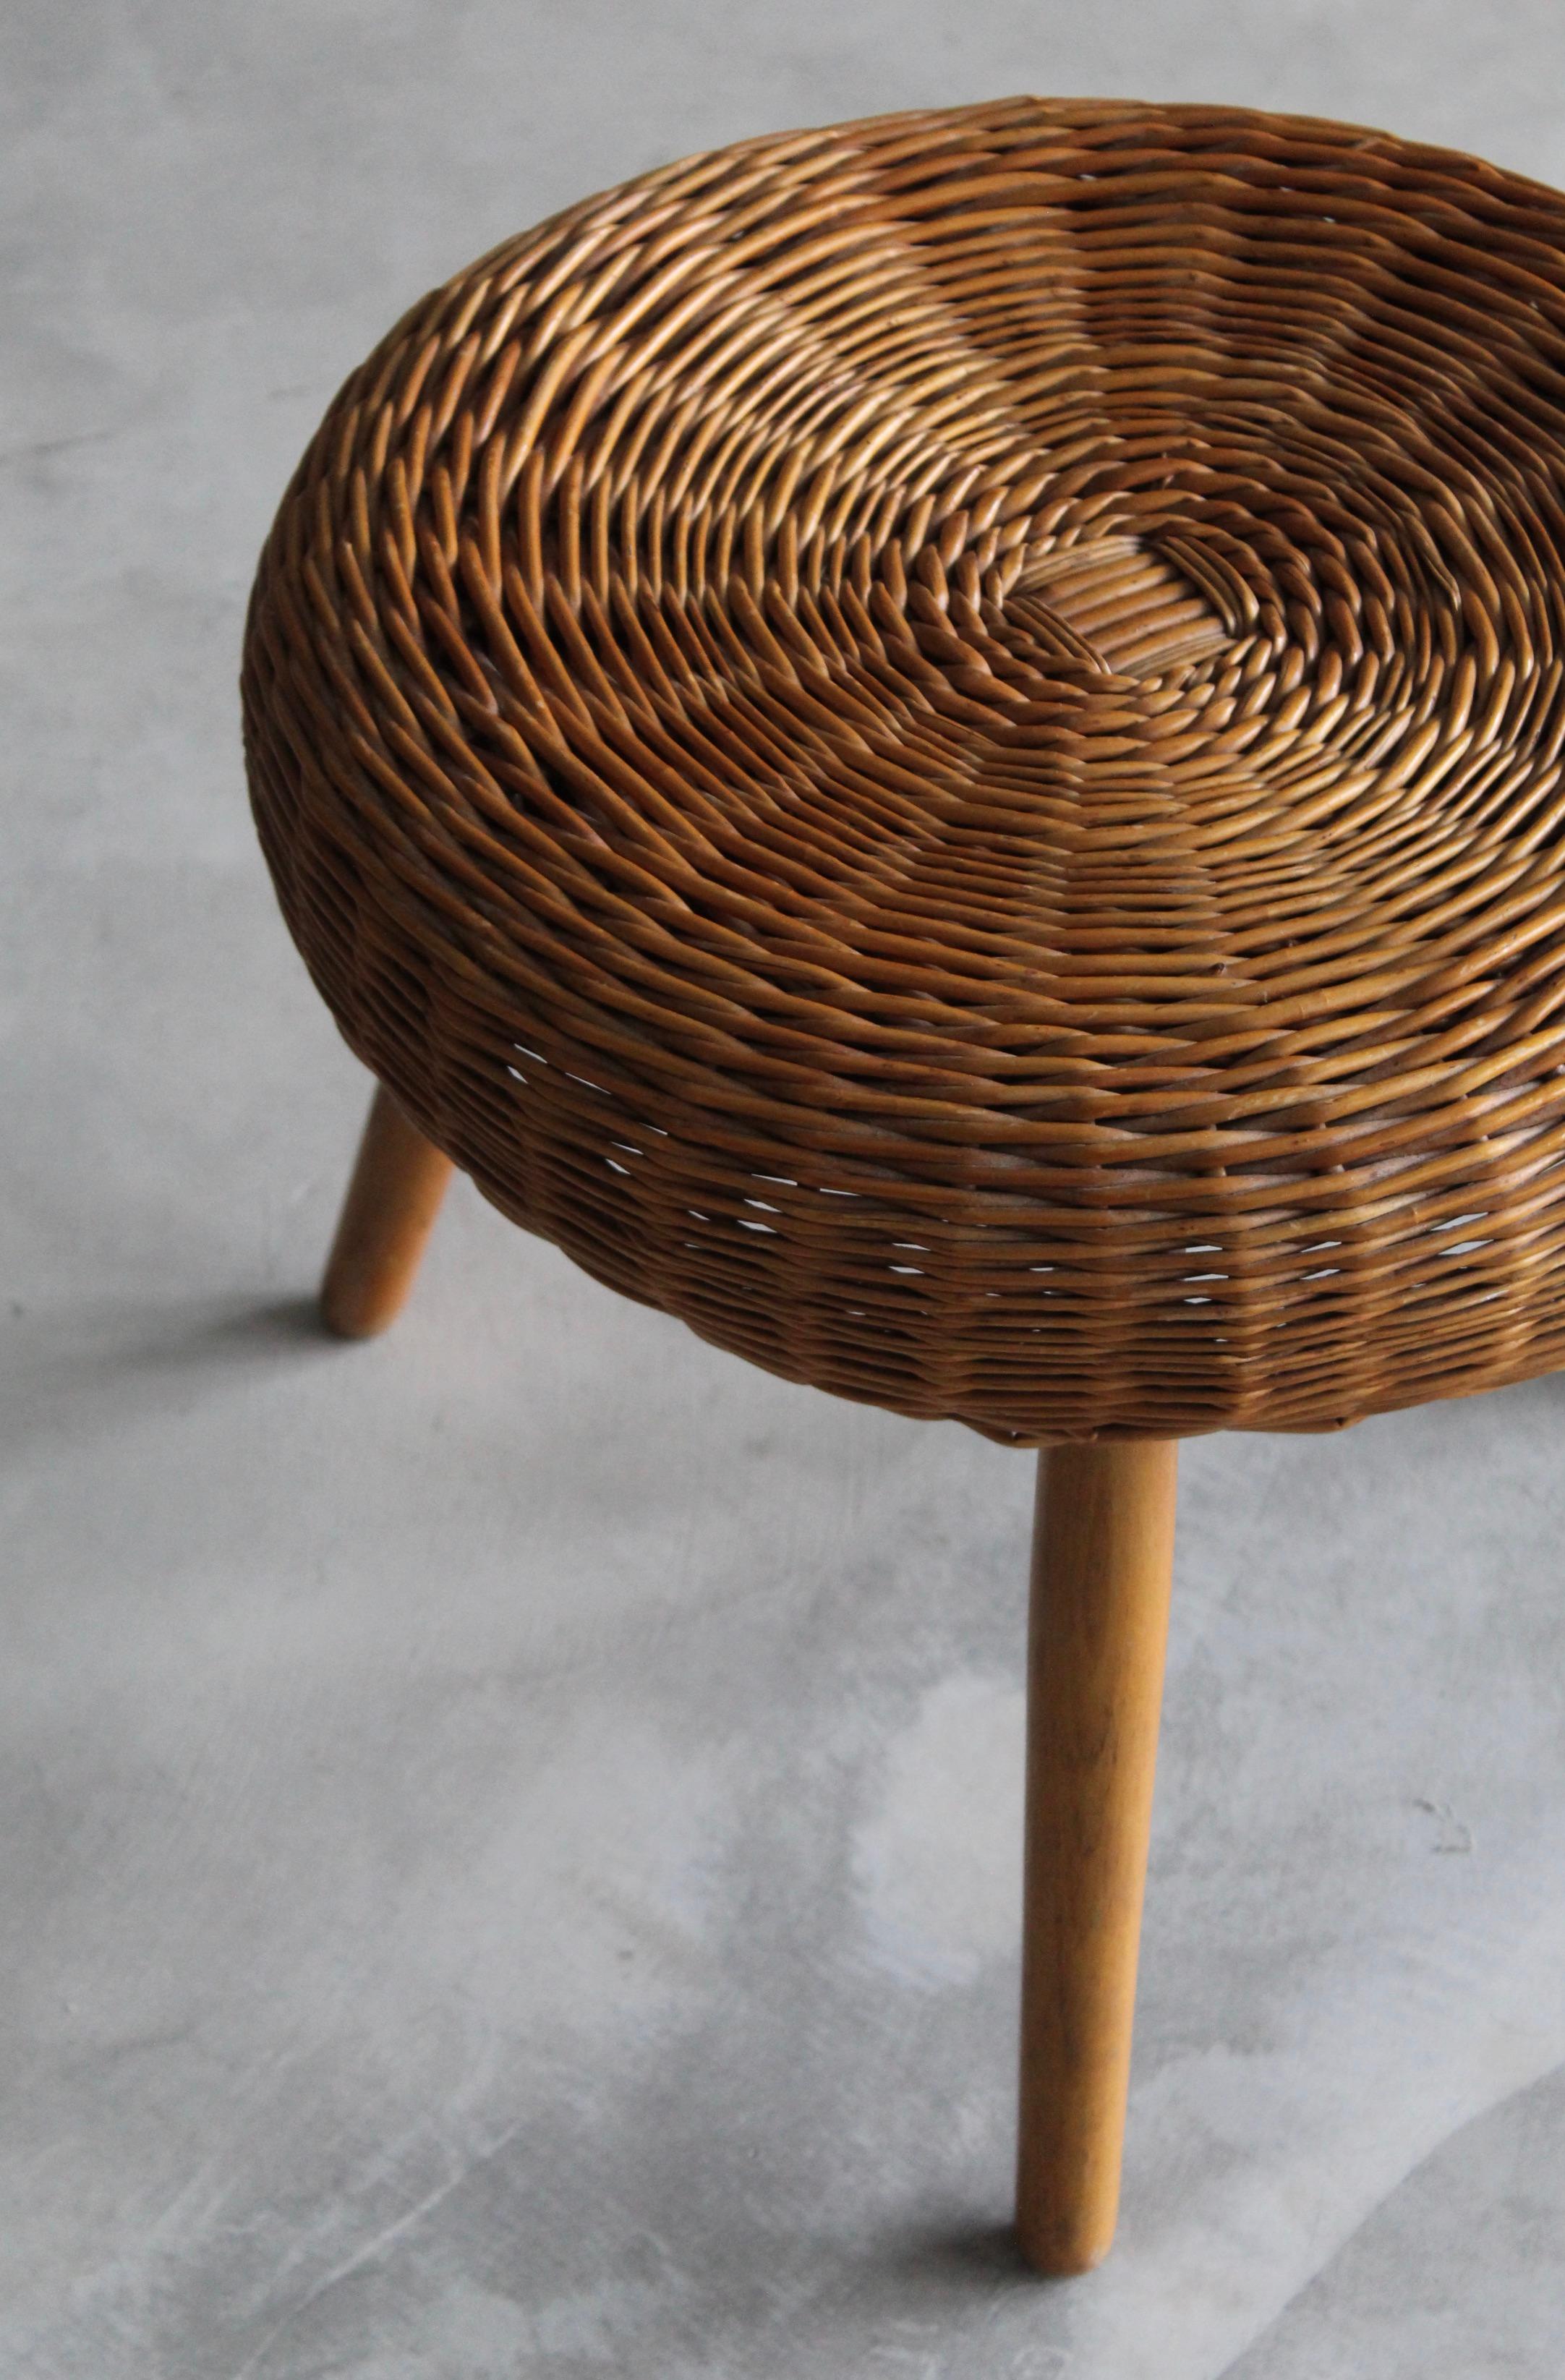 American Tony Paul 'Attribution' Stool, Woven Wicker, Wood, United States, 1950s